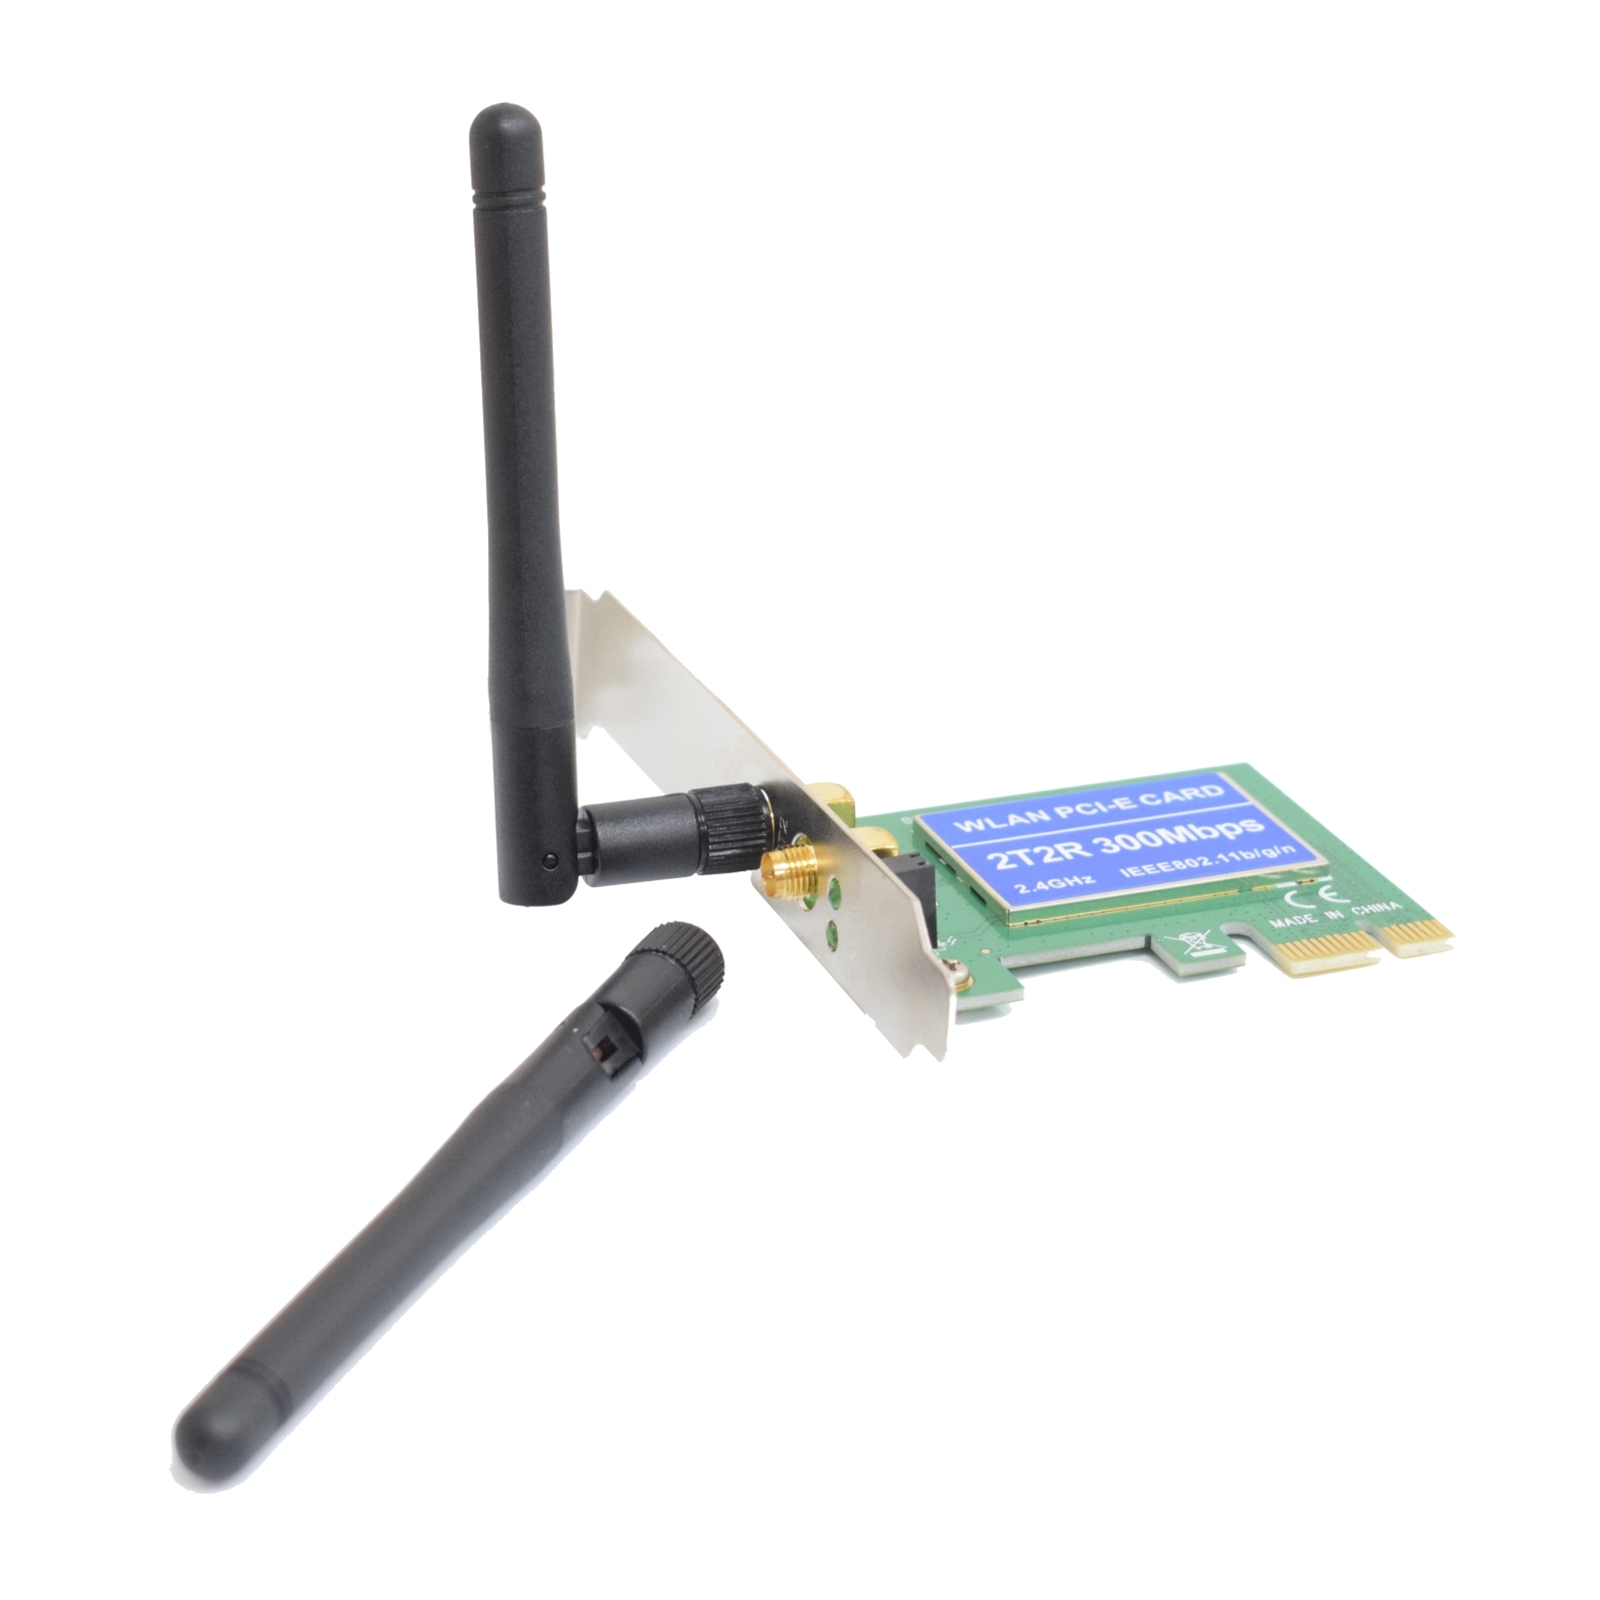 Evo Labs PCI-Express N300 WiFi Card with Detachable Antennas and Full/Low Profile Brackets